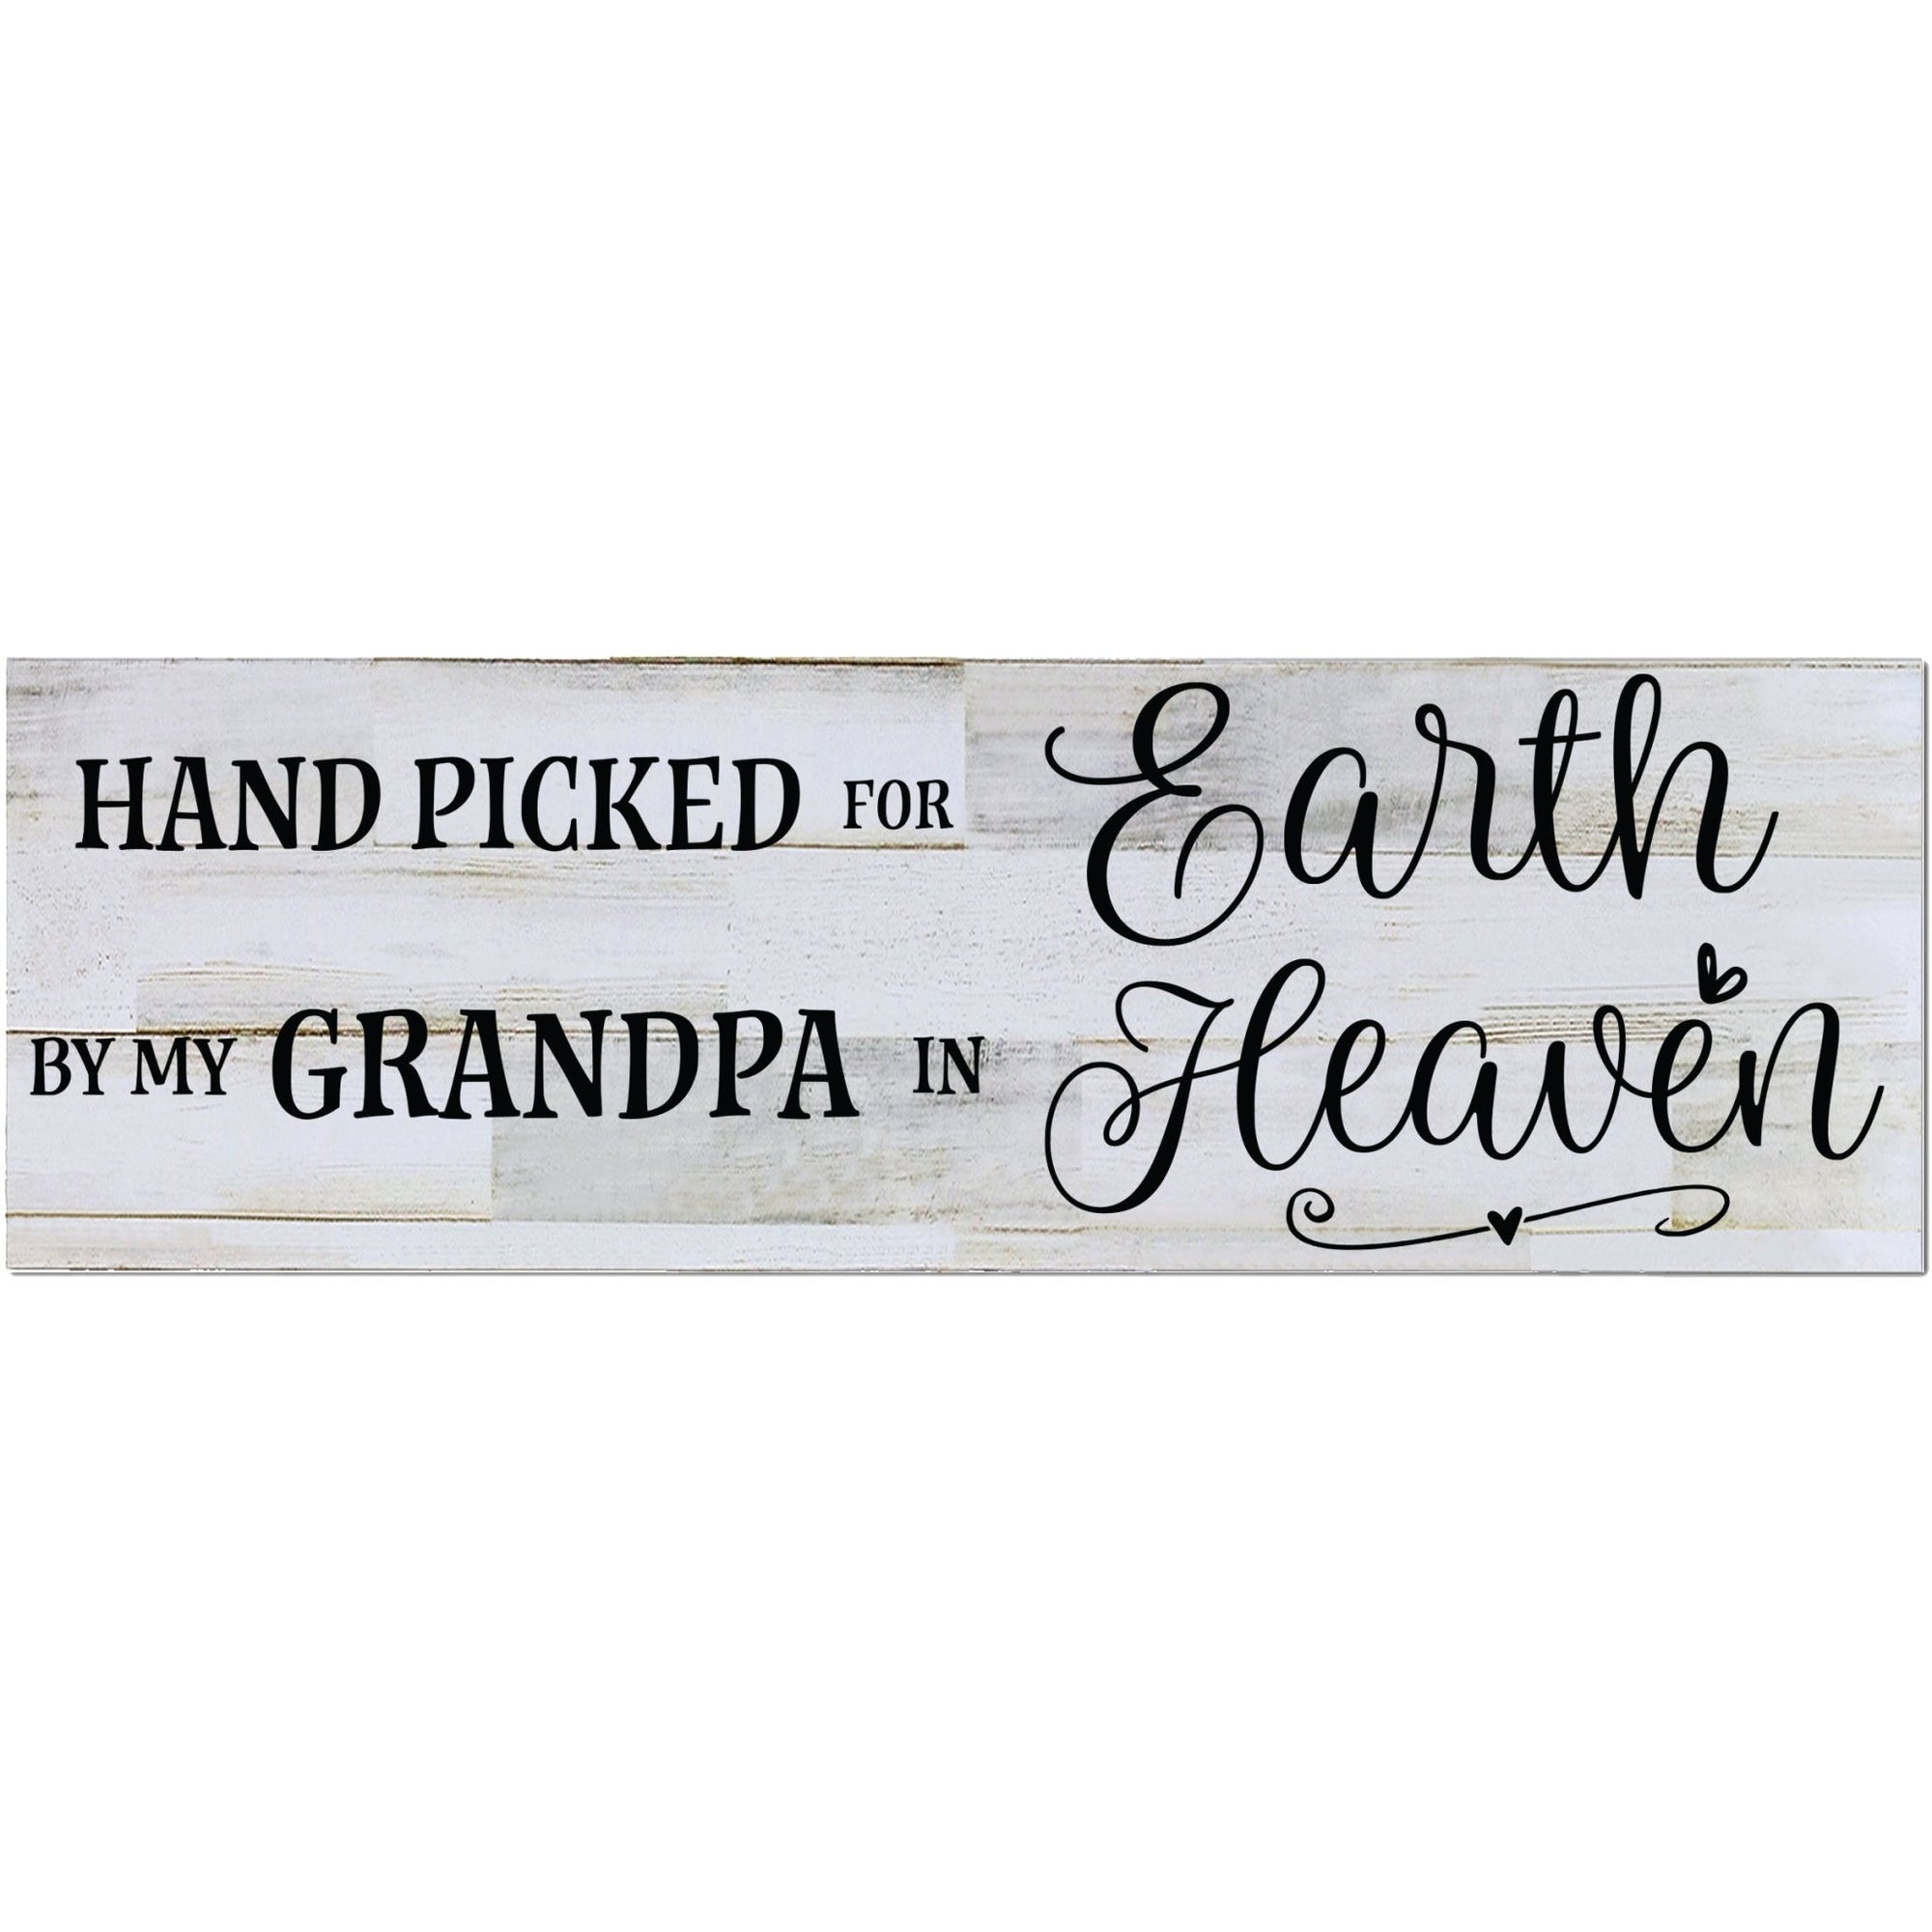 Modern Inspirational Wooden Wall Art Hanging Plaque 22.5x6 - Hand-Picked For Earth By My Grandpa - for Family and Home Decorations - LifeSong Milestones